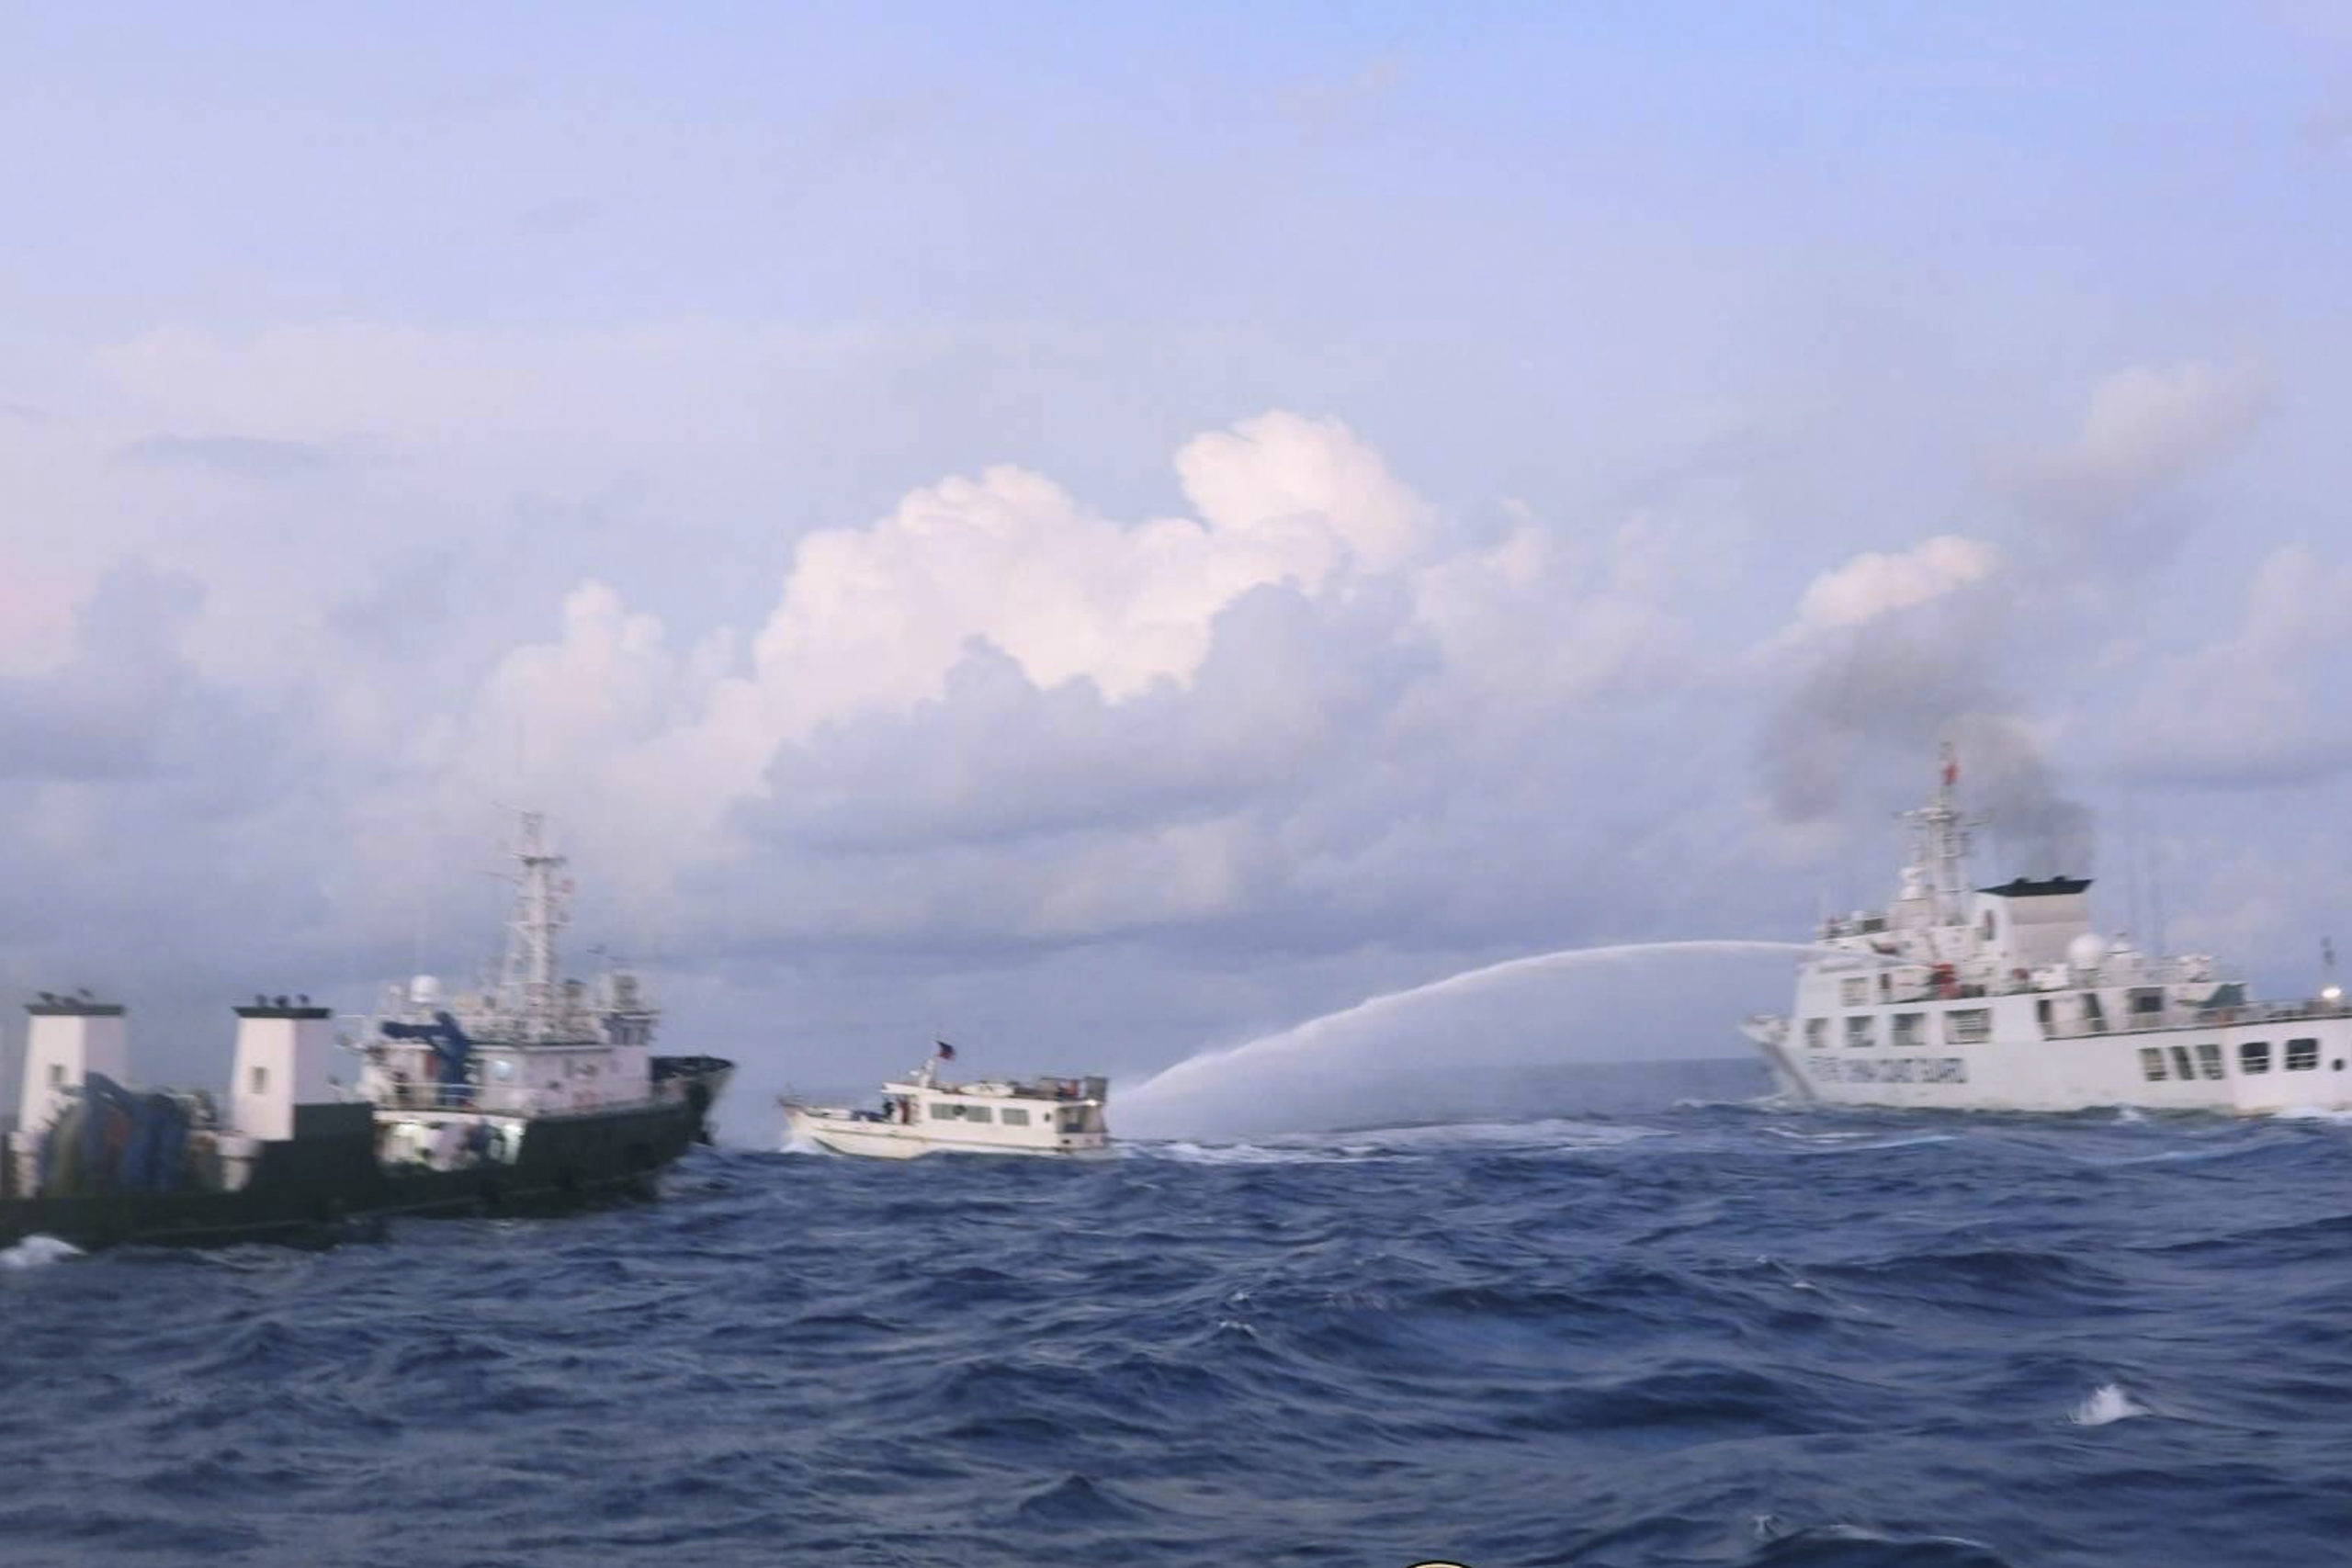 A Chinese Coast Guard ship is shown using water cannons on a Philippine navy-operated supply boat in the disputed South China Sea on Sunday.